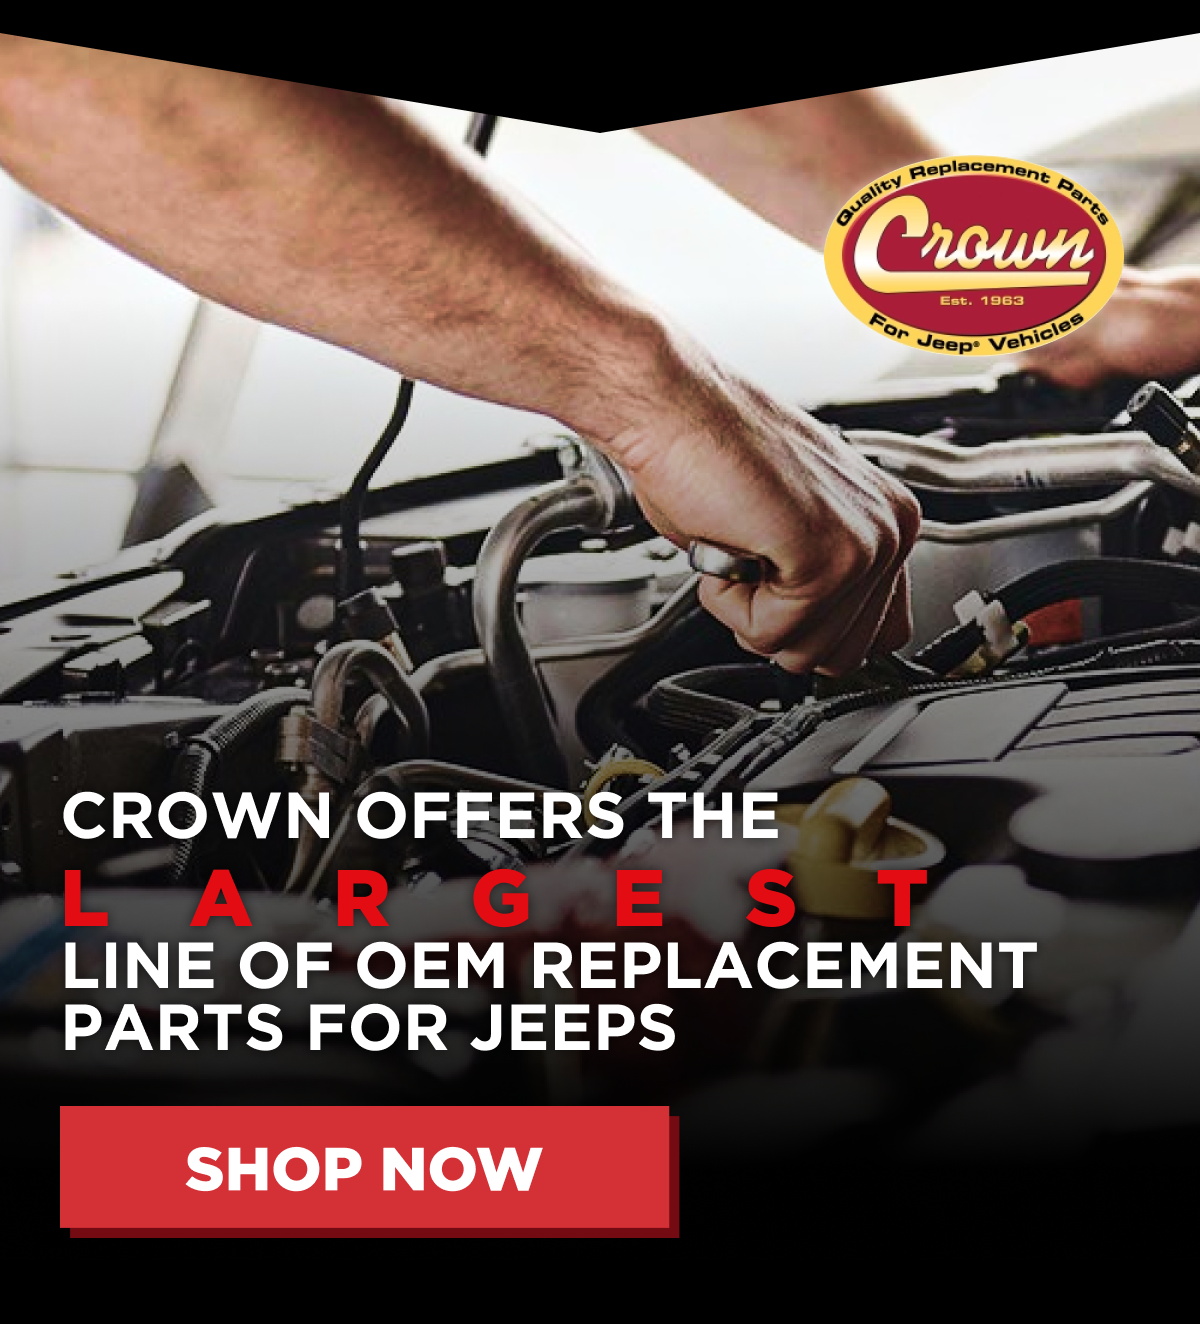 Crown Offers The Largest Line of OEM Replacement Parts For Jeeps